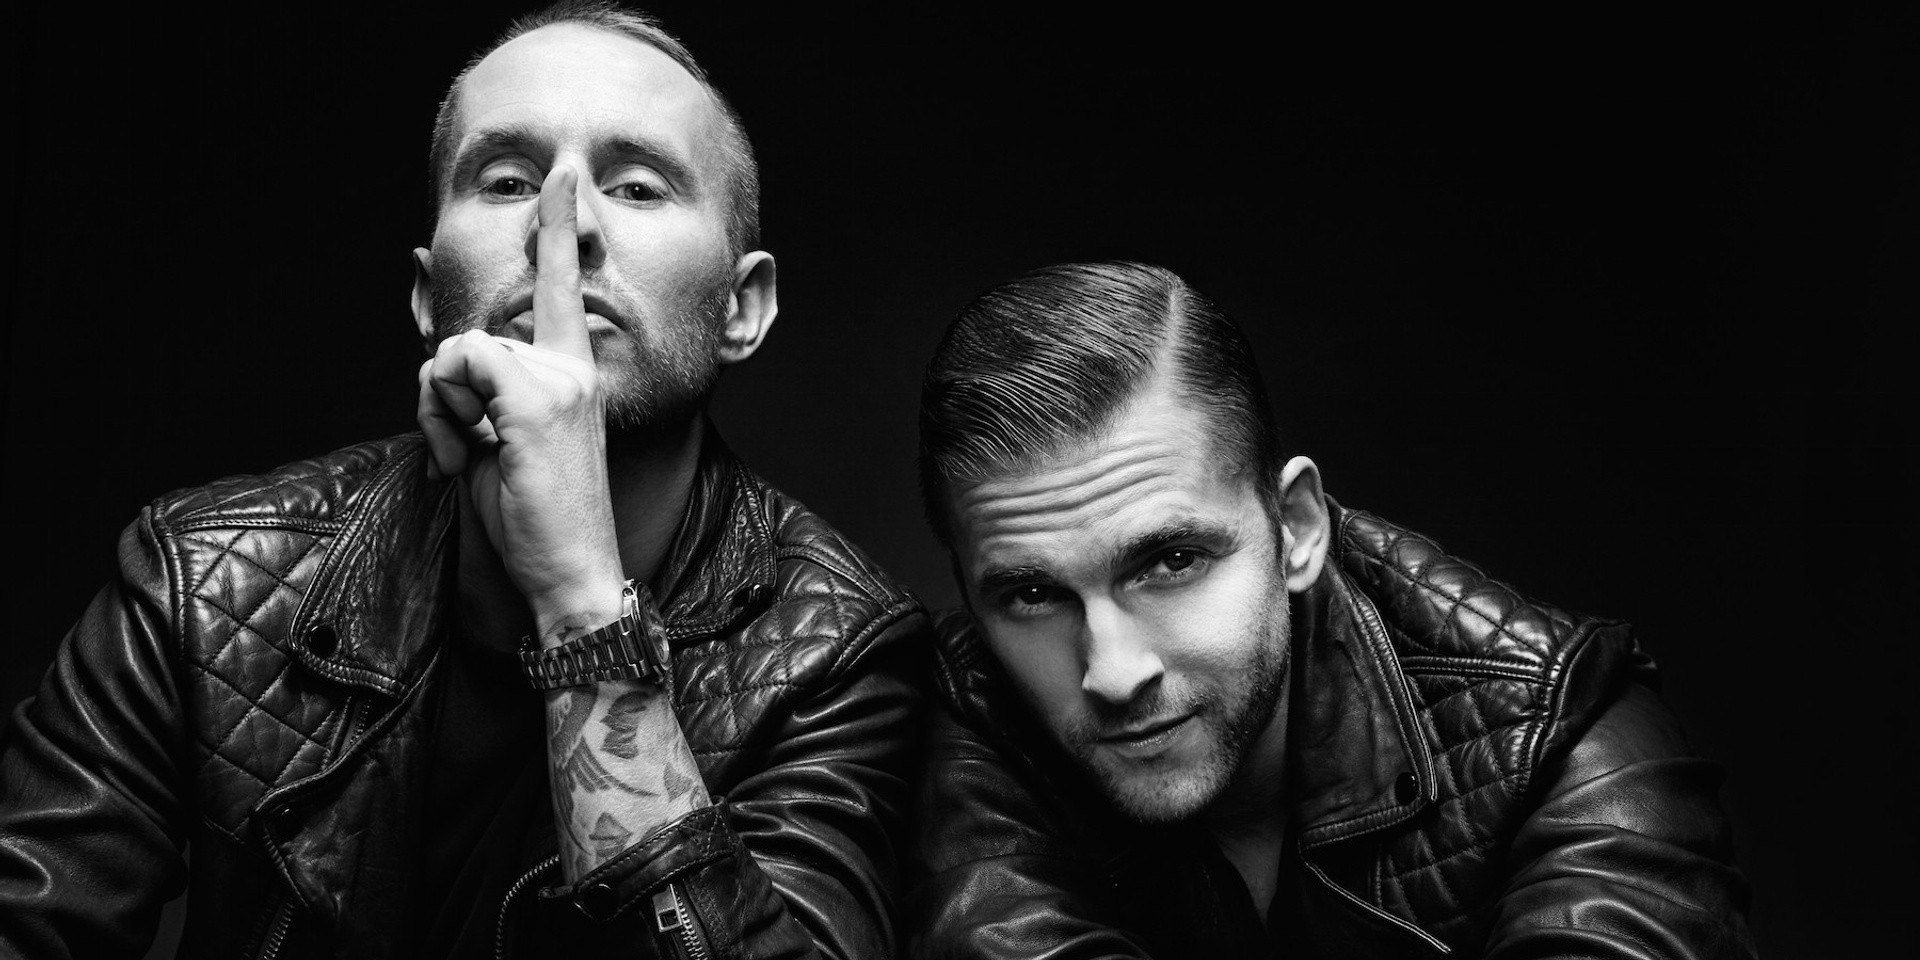 Galantis and more join Dimitri Vegas & Like Mike and W&W in ZoukOut Phase 1 line-up